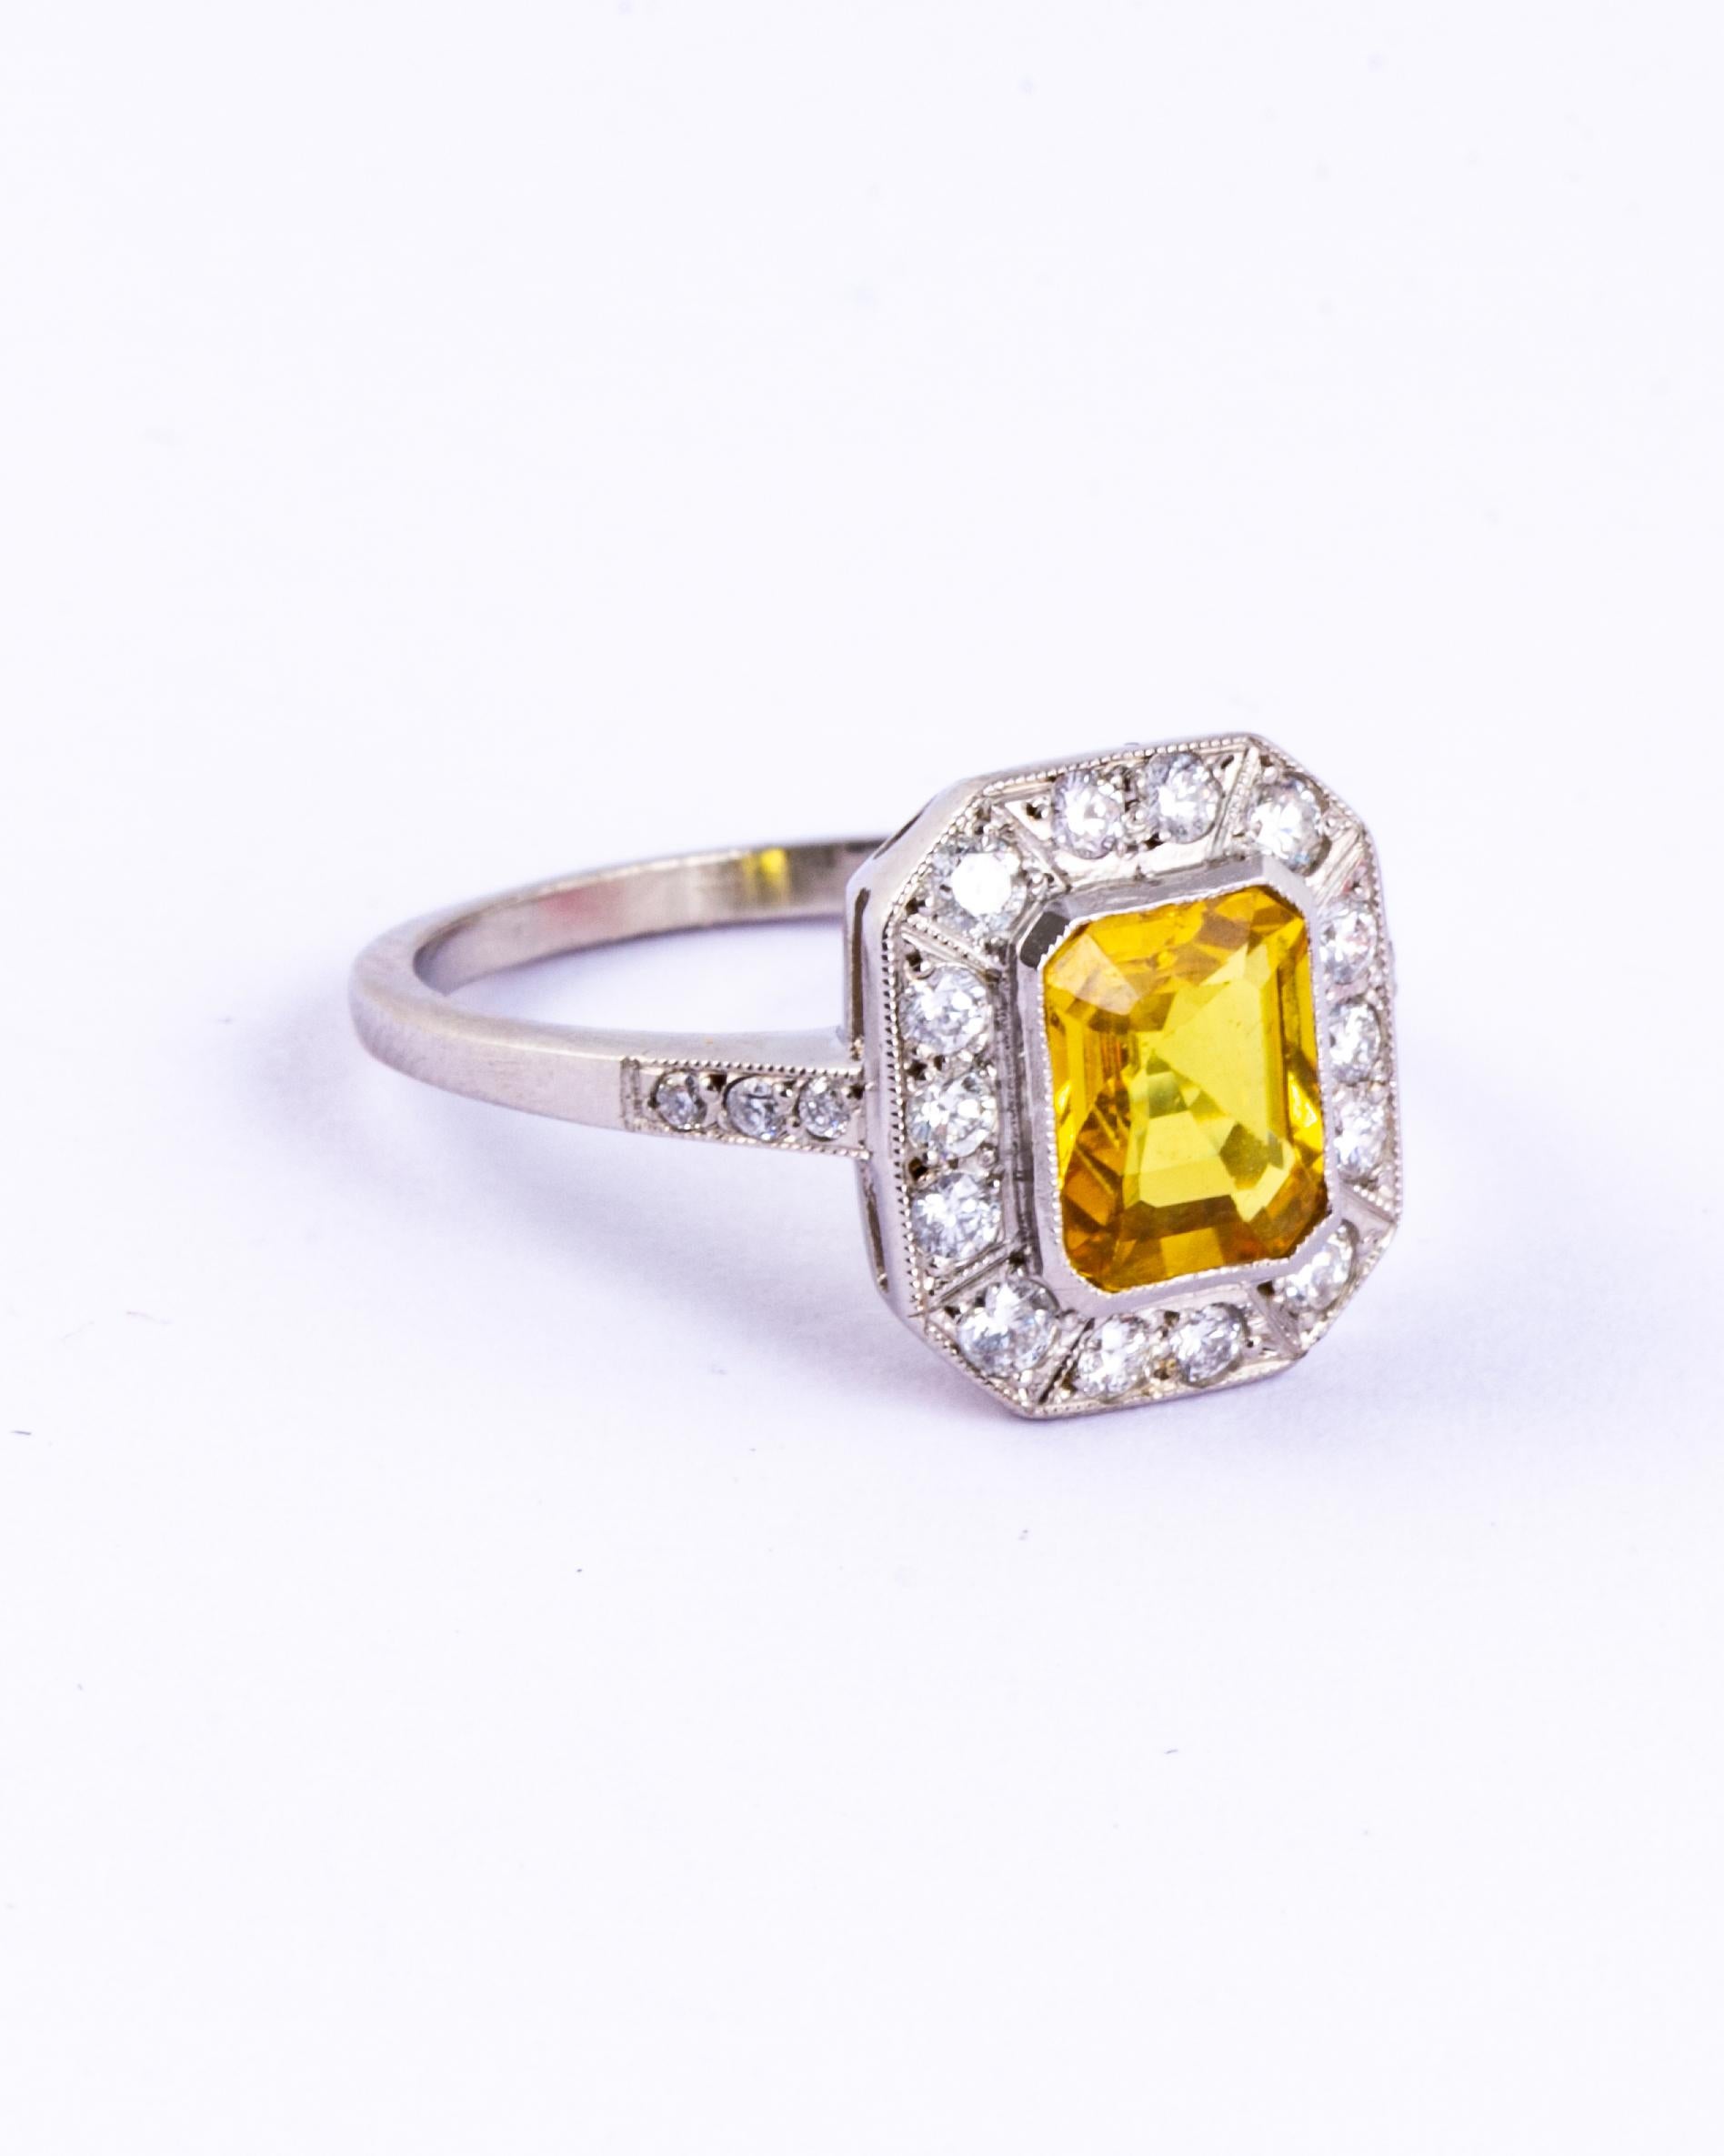 This stunning cluster ring holds a bright yellow sapphire at the centre and is surrounded by glistening diamonds. The sapphire measures approx 1.5carat and the brilliant cut diamonds total approx 70pts including the shoulders. Modelled in platinum.